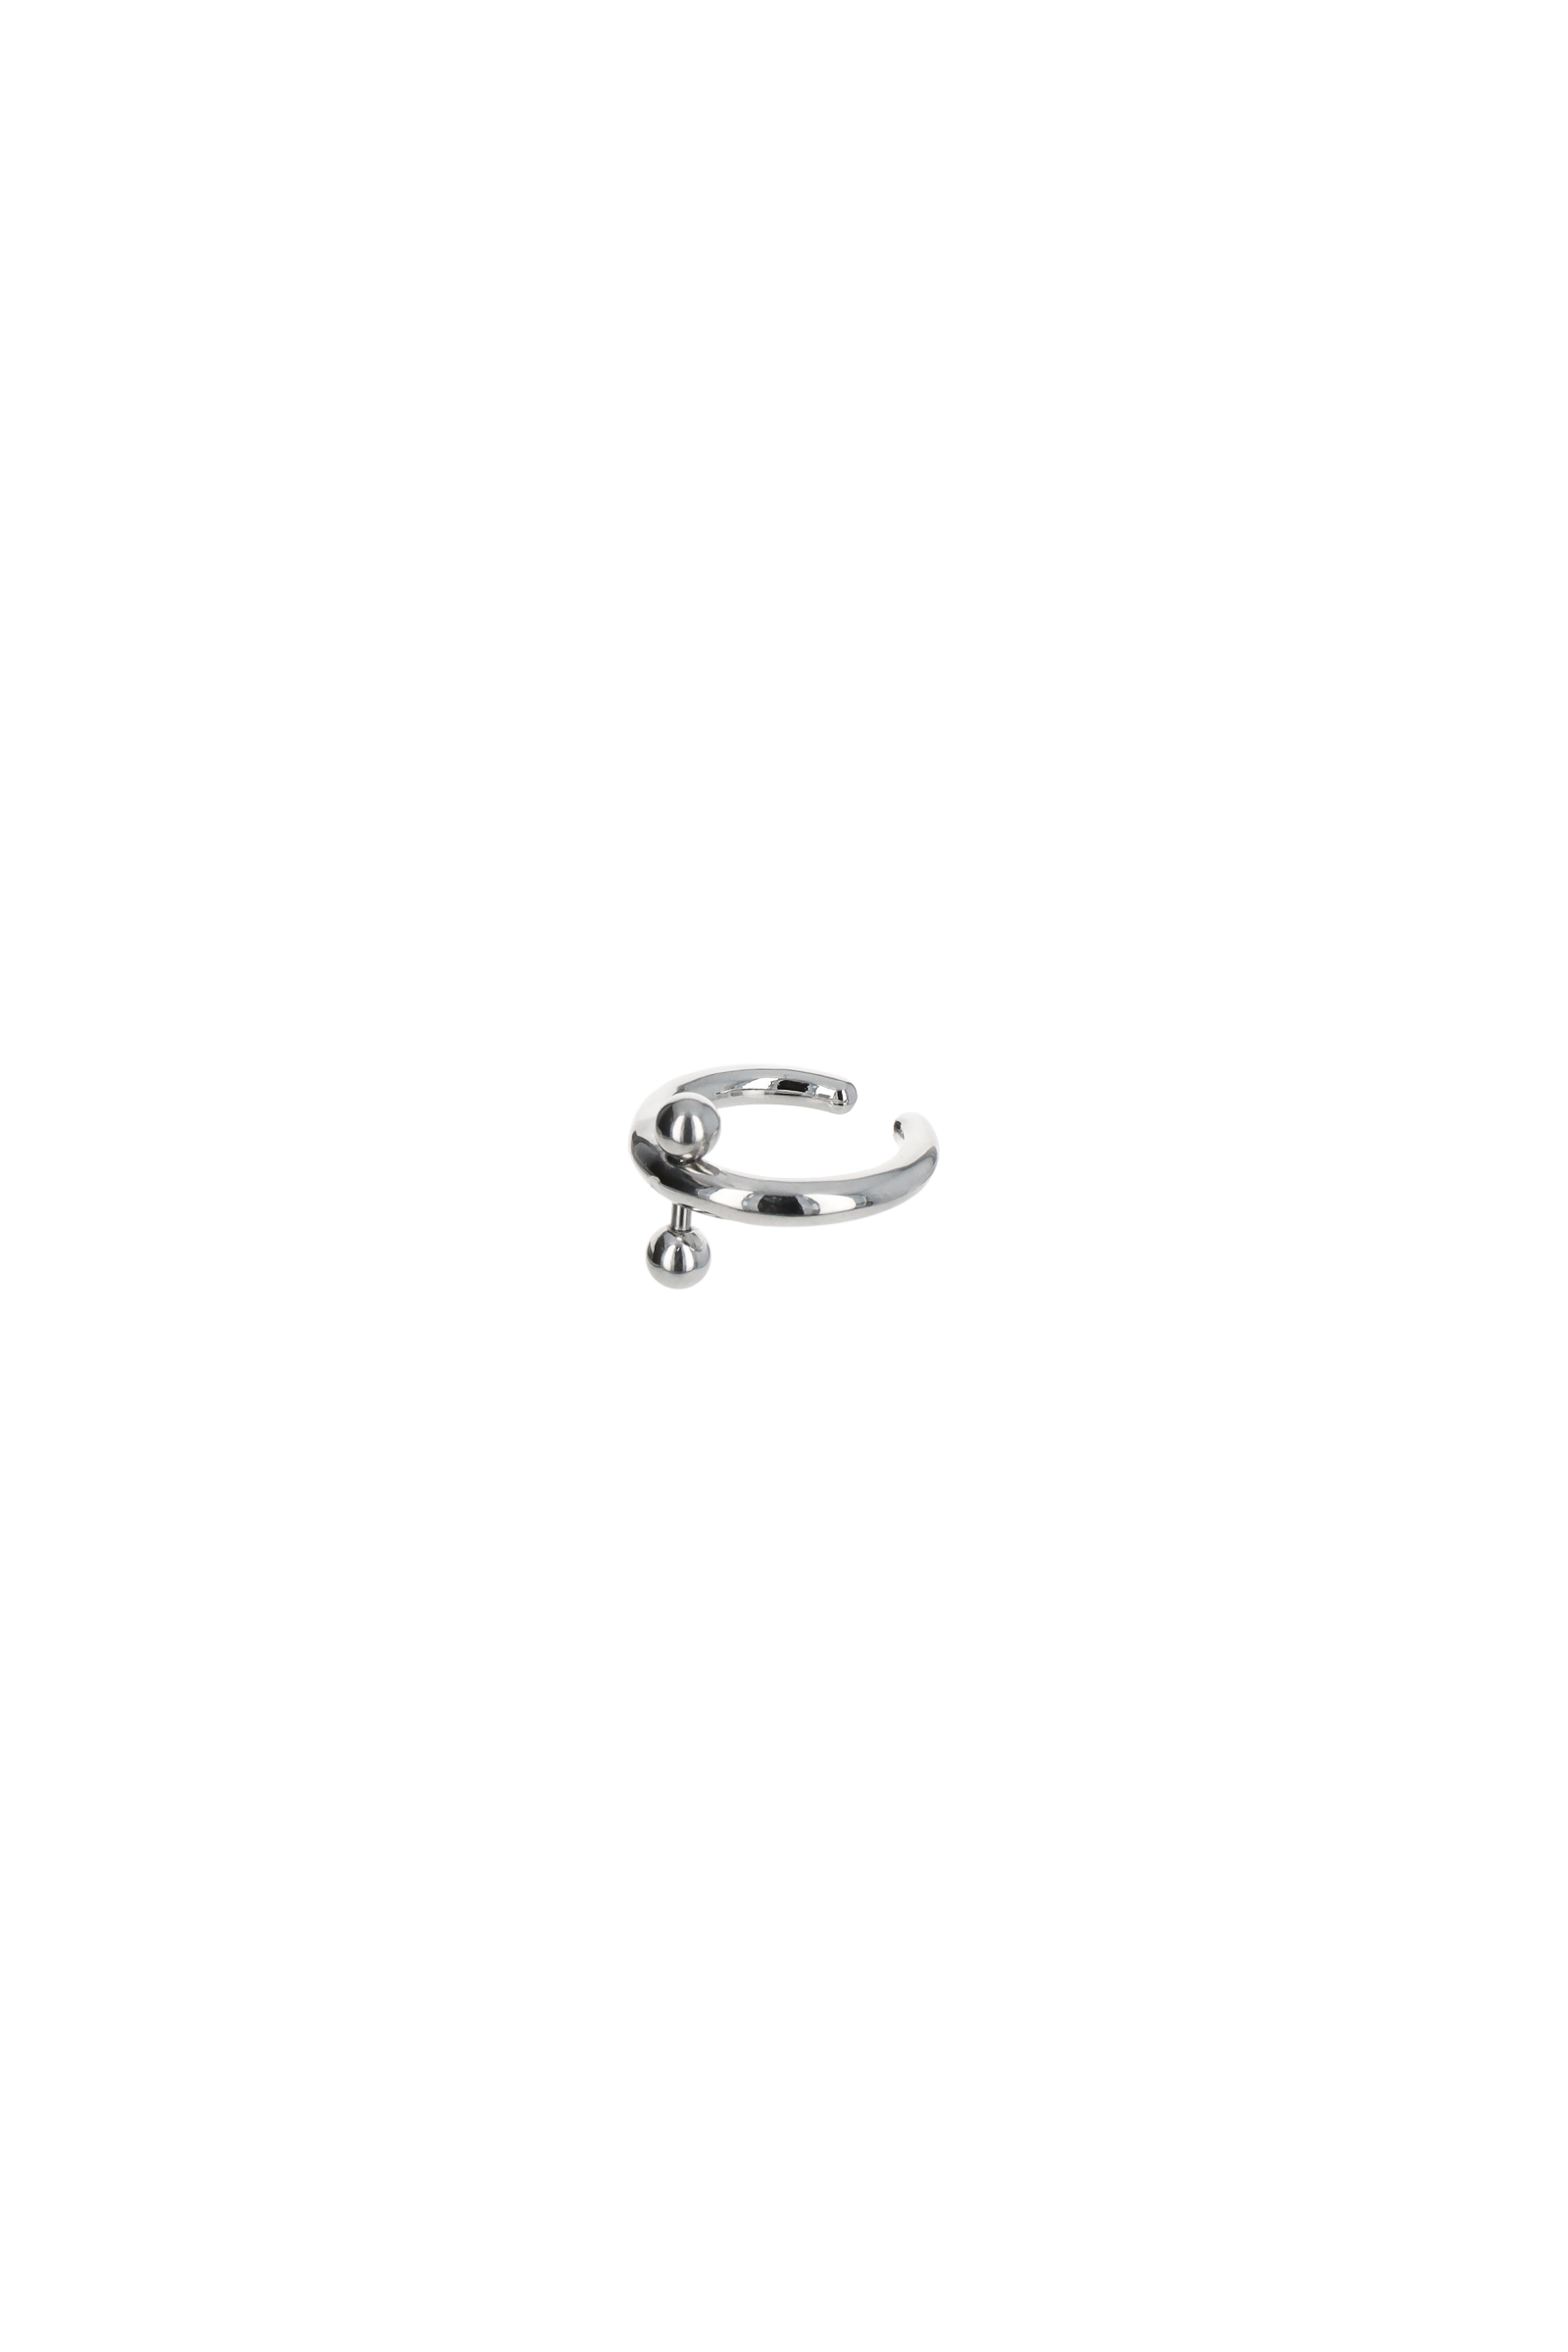 Justine Clenquet Azel Ring